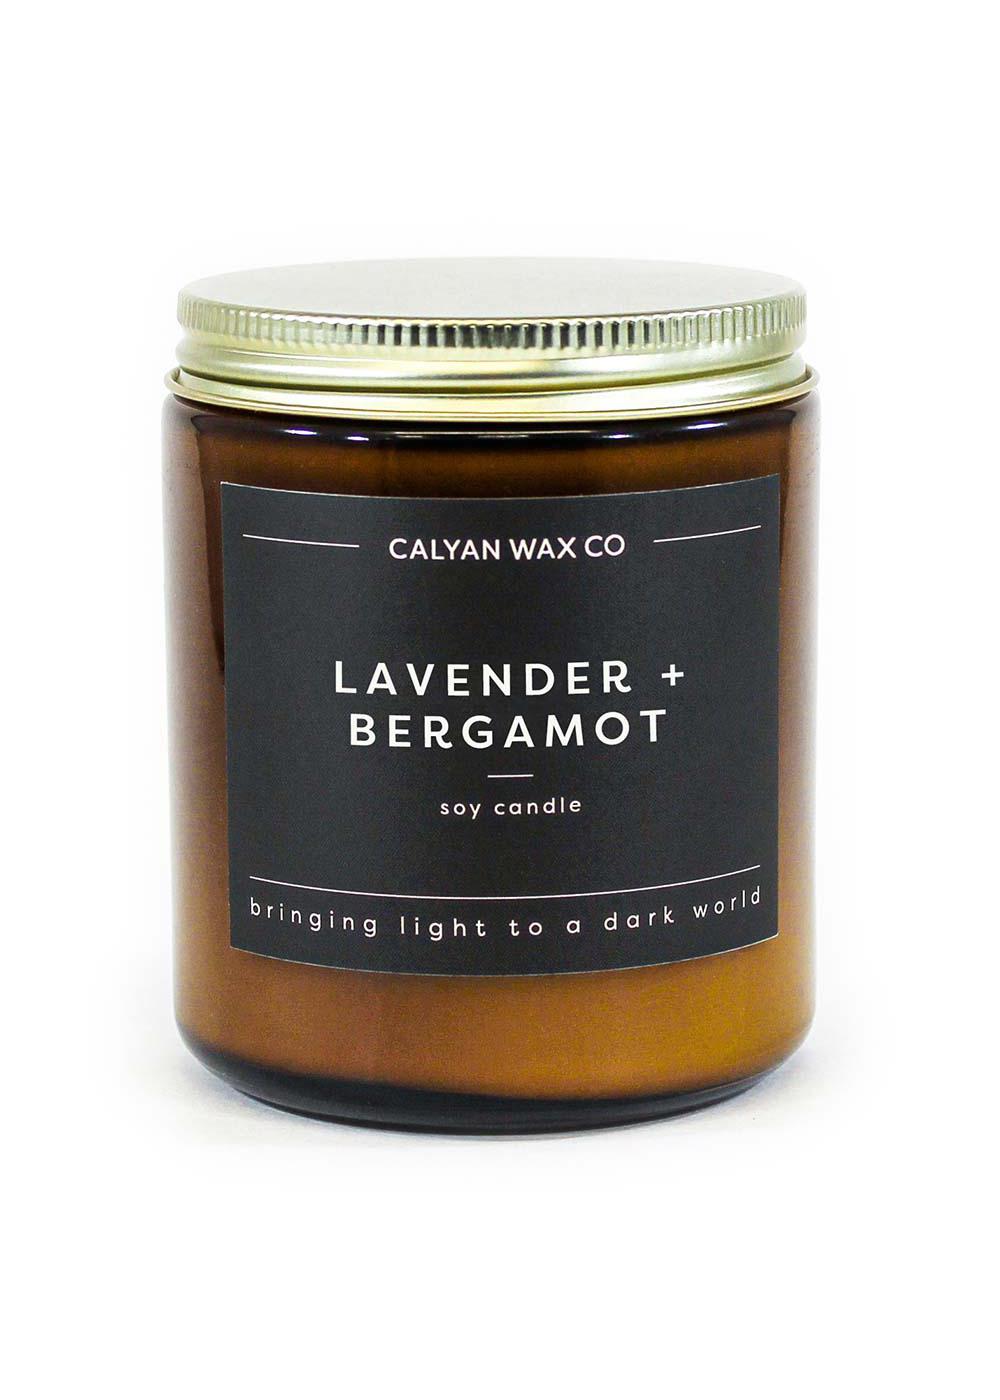 Calyan Wax Co. Lavender + Bergamot Scented Soy Candle; image 1 of 3